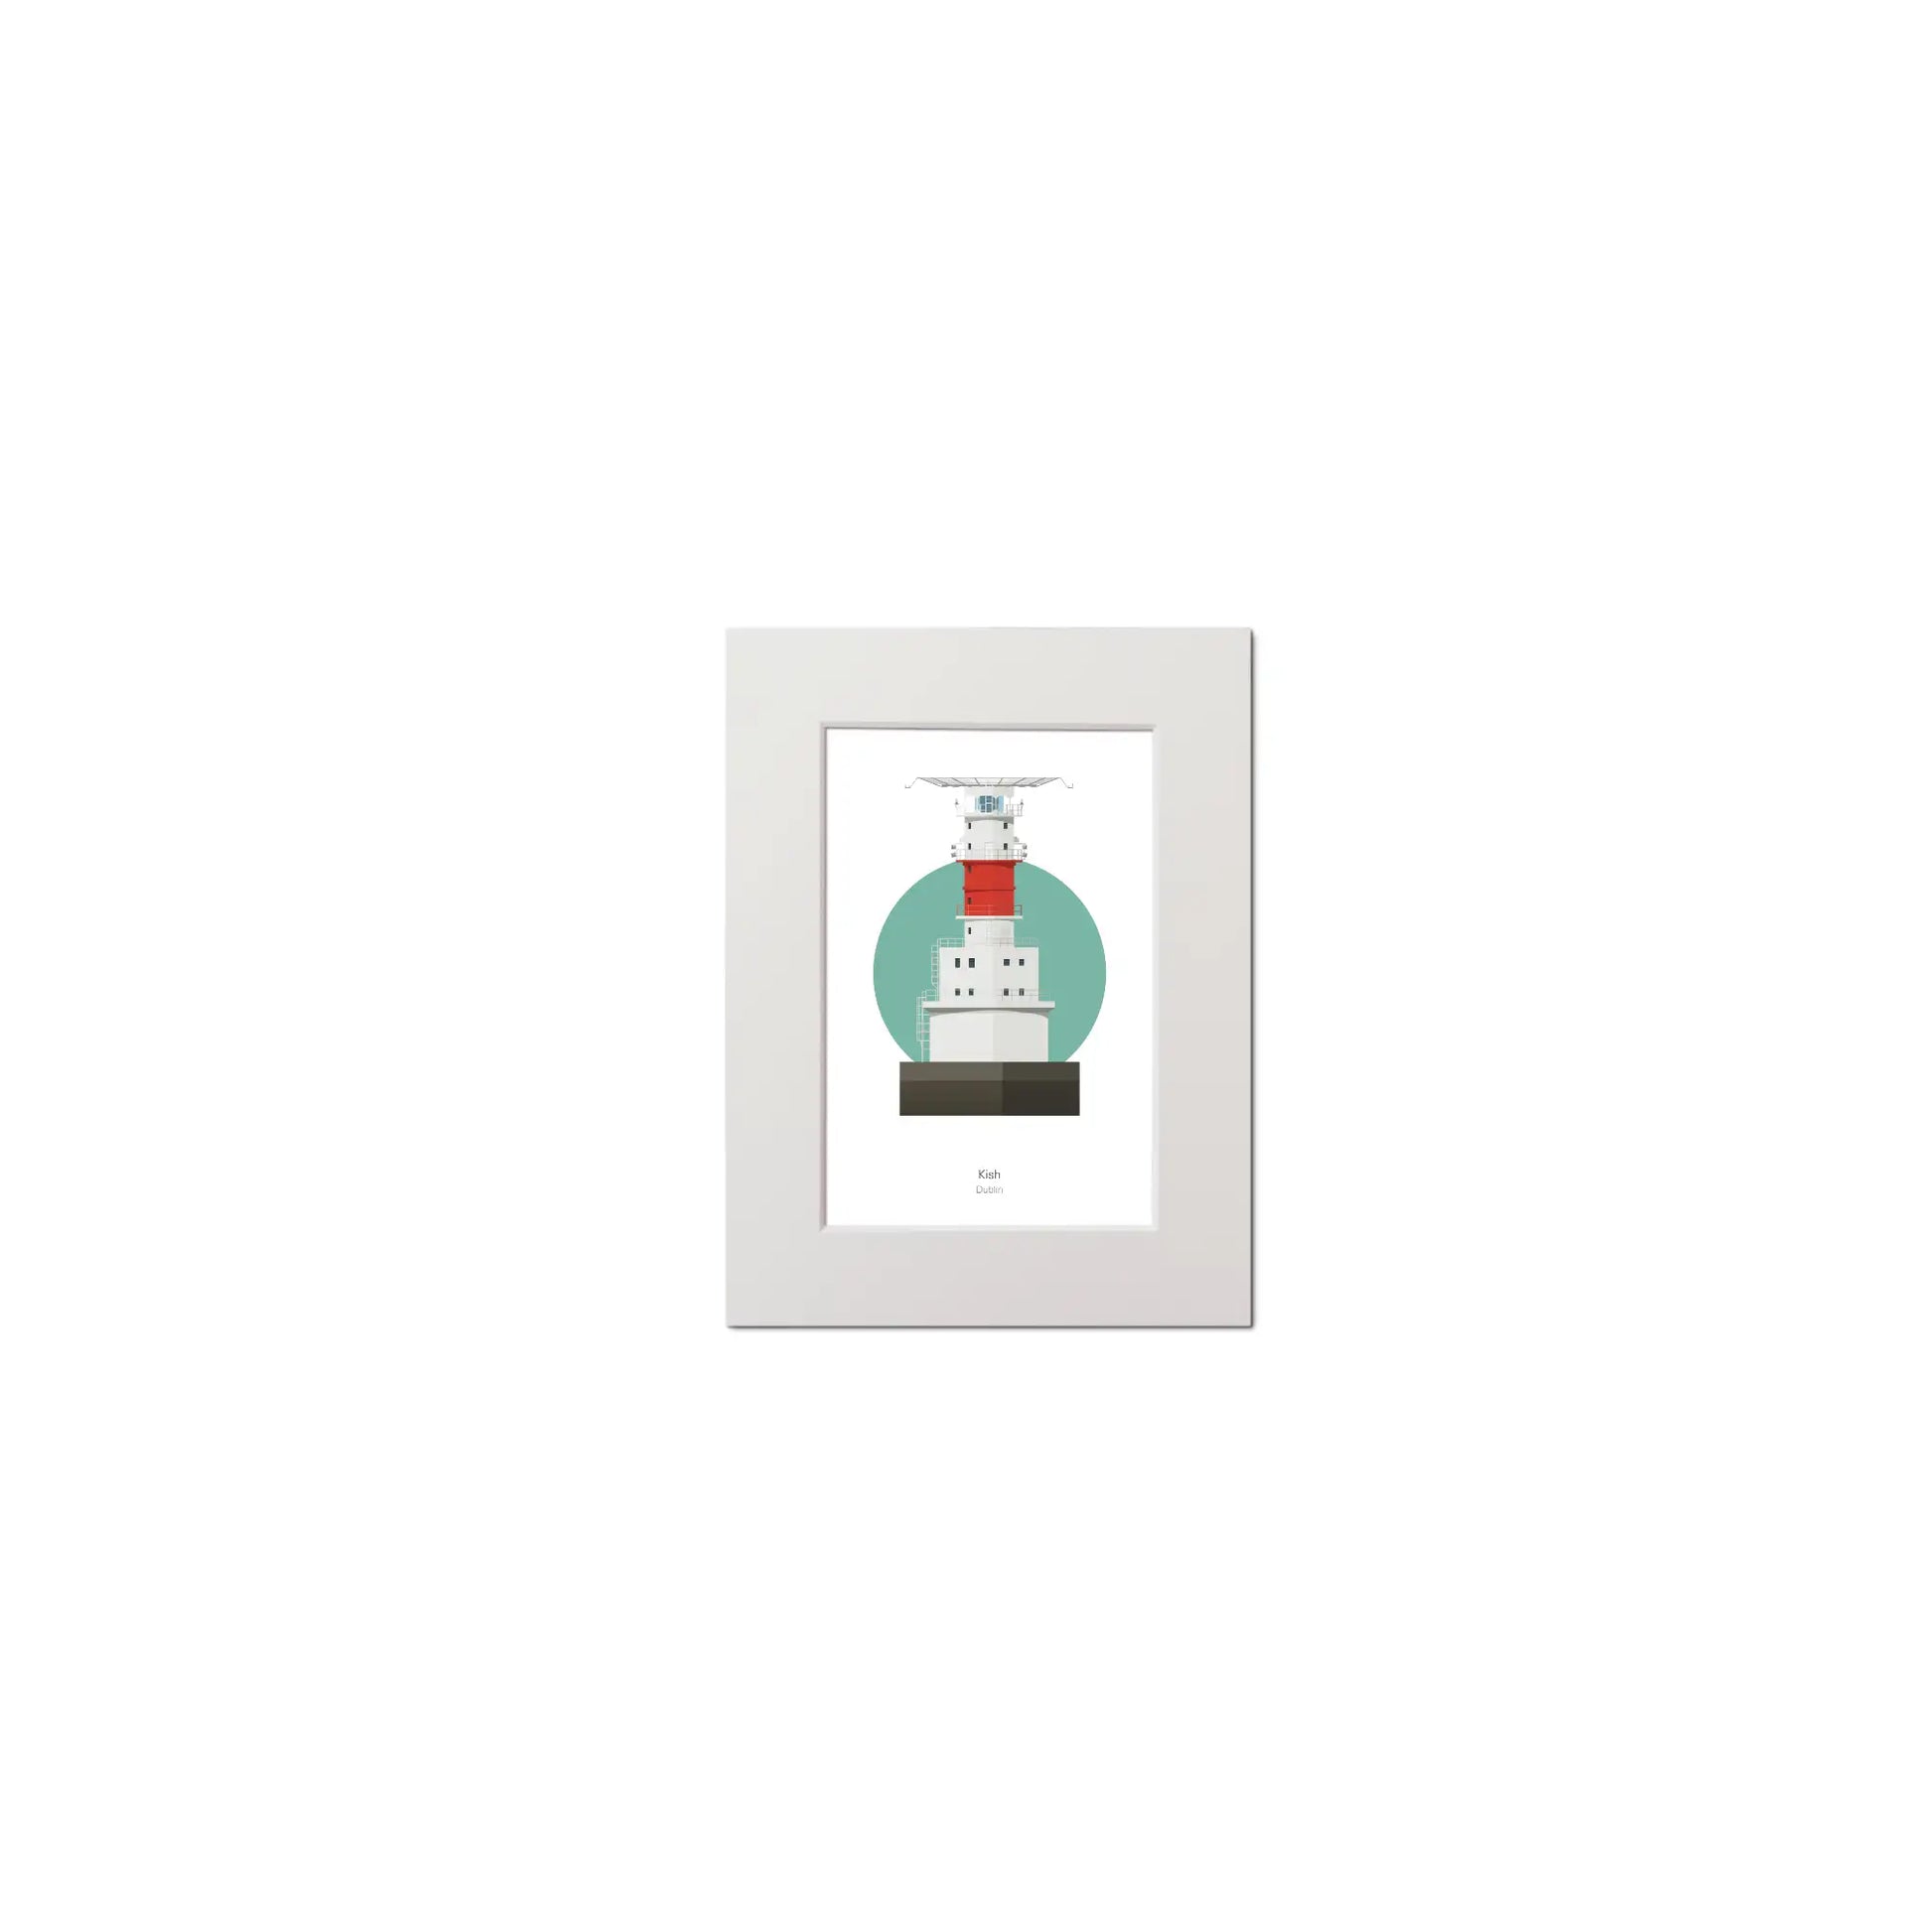 Illustration of Kish Bank lighthouse on a white background inside light blue square, mounted and measuring 15x20cm.